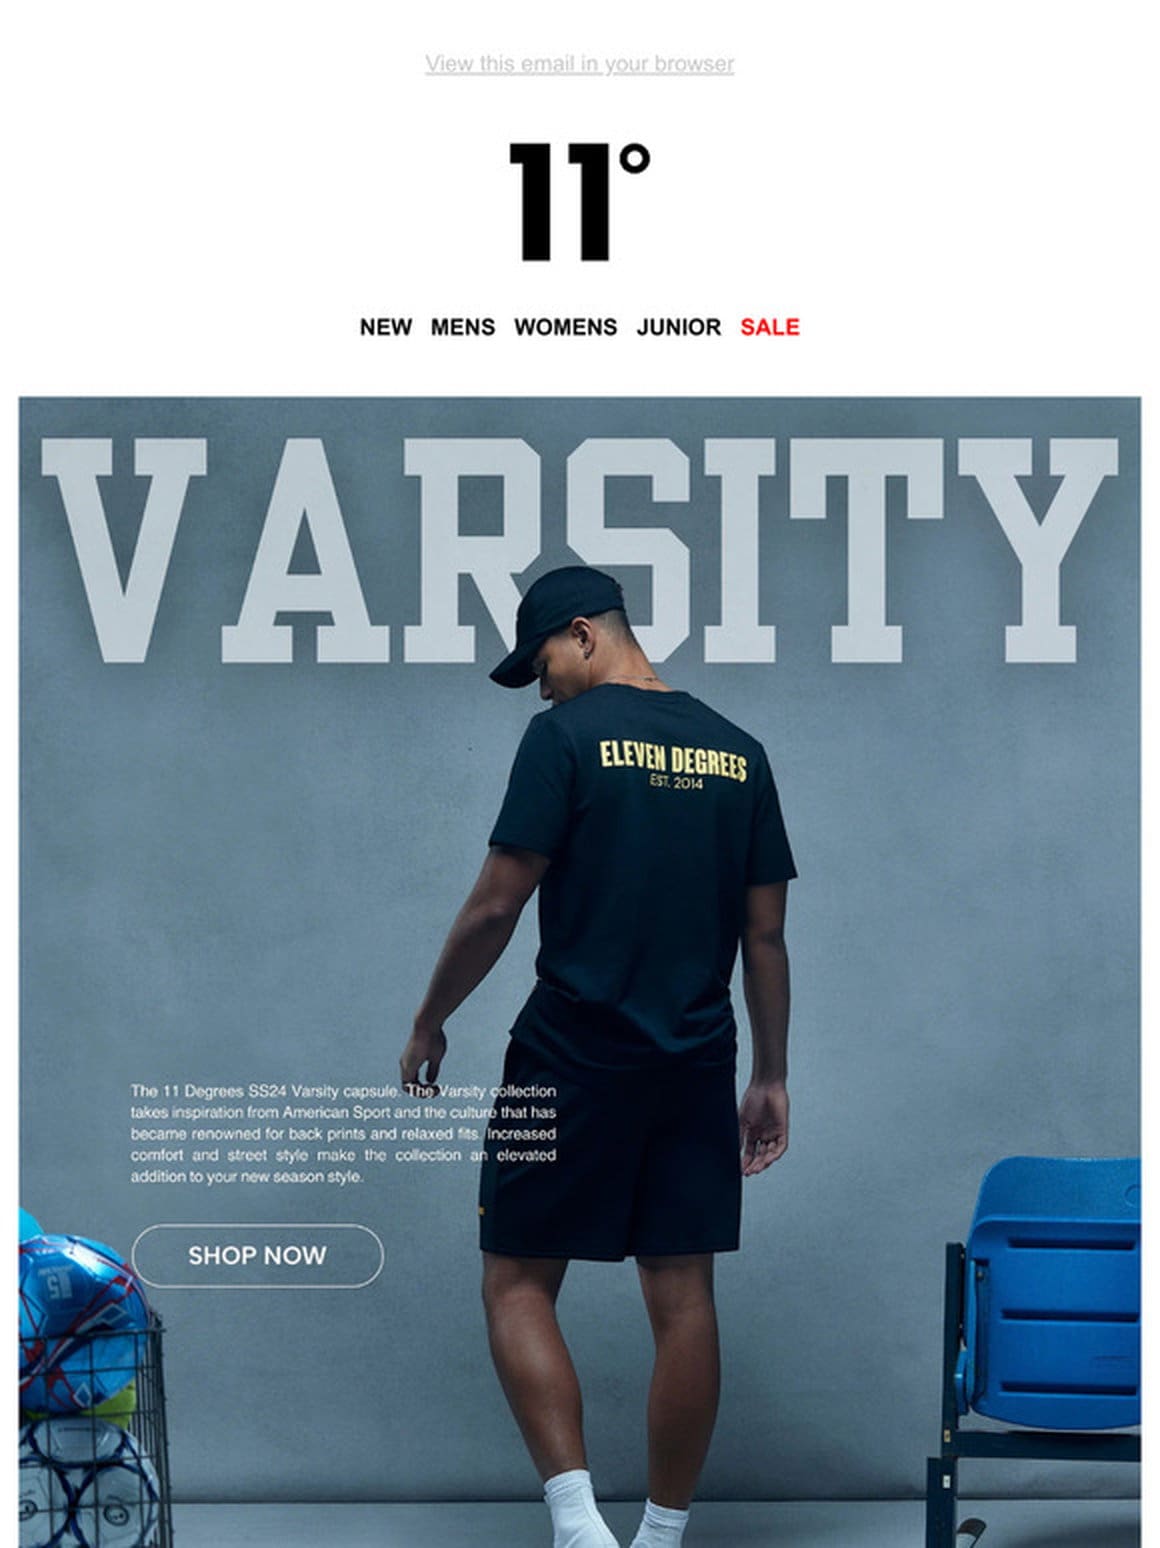 VARSITY COLLECTION NOW LIVE